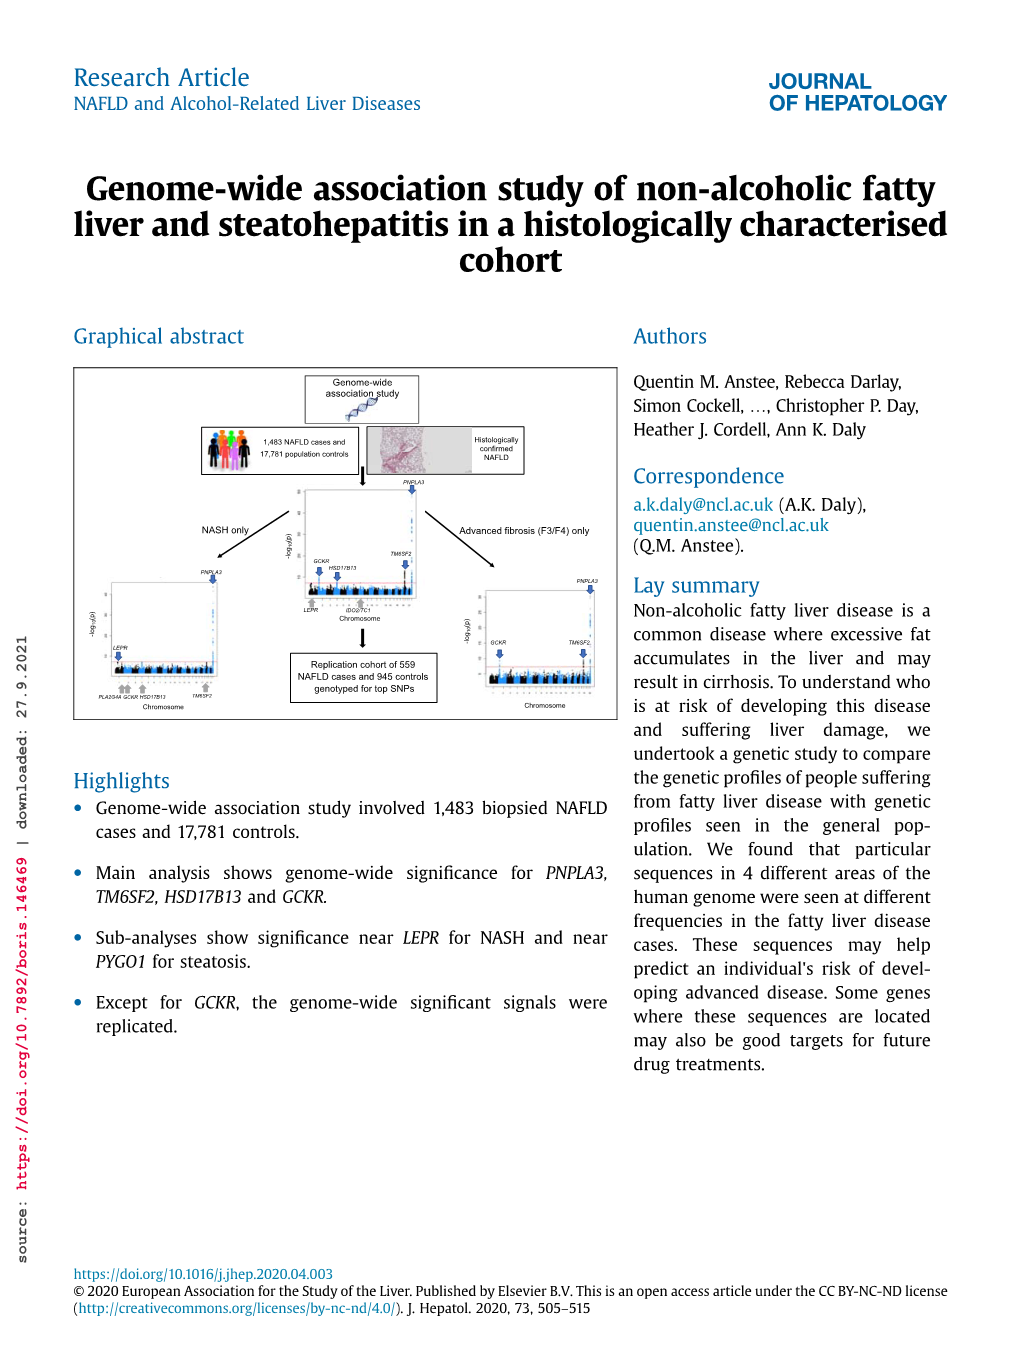 Genome-Wide Association Study of Non-Alcoholic Fatty Liverq and Steatohepatitis in a Histologically Characterised Cohort